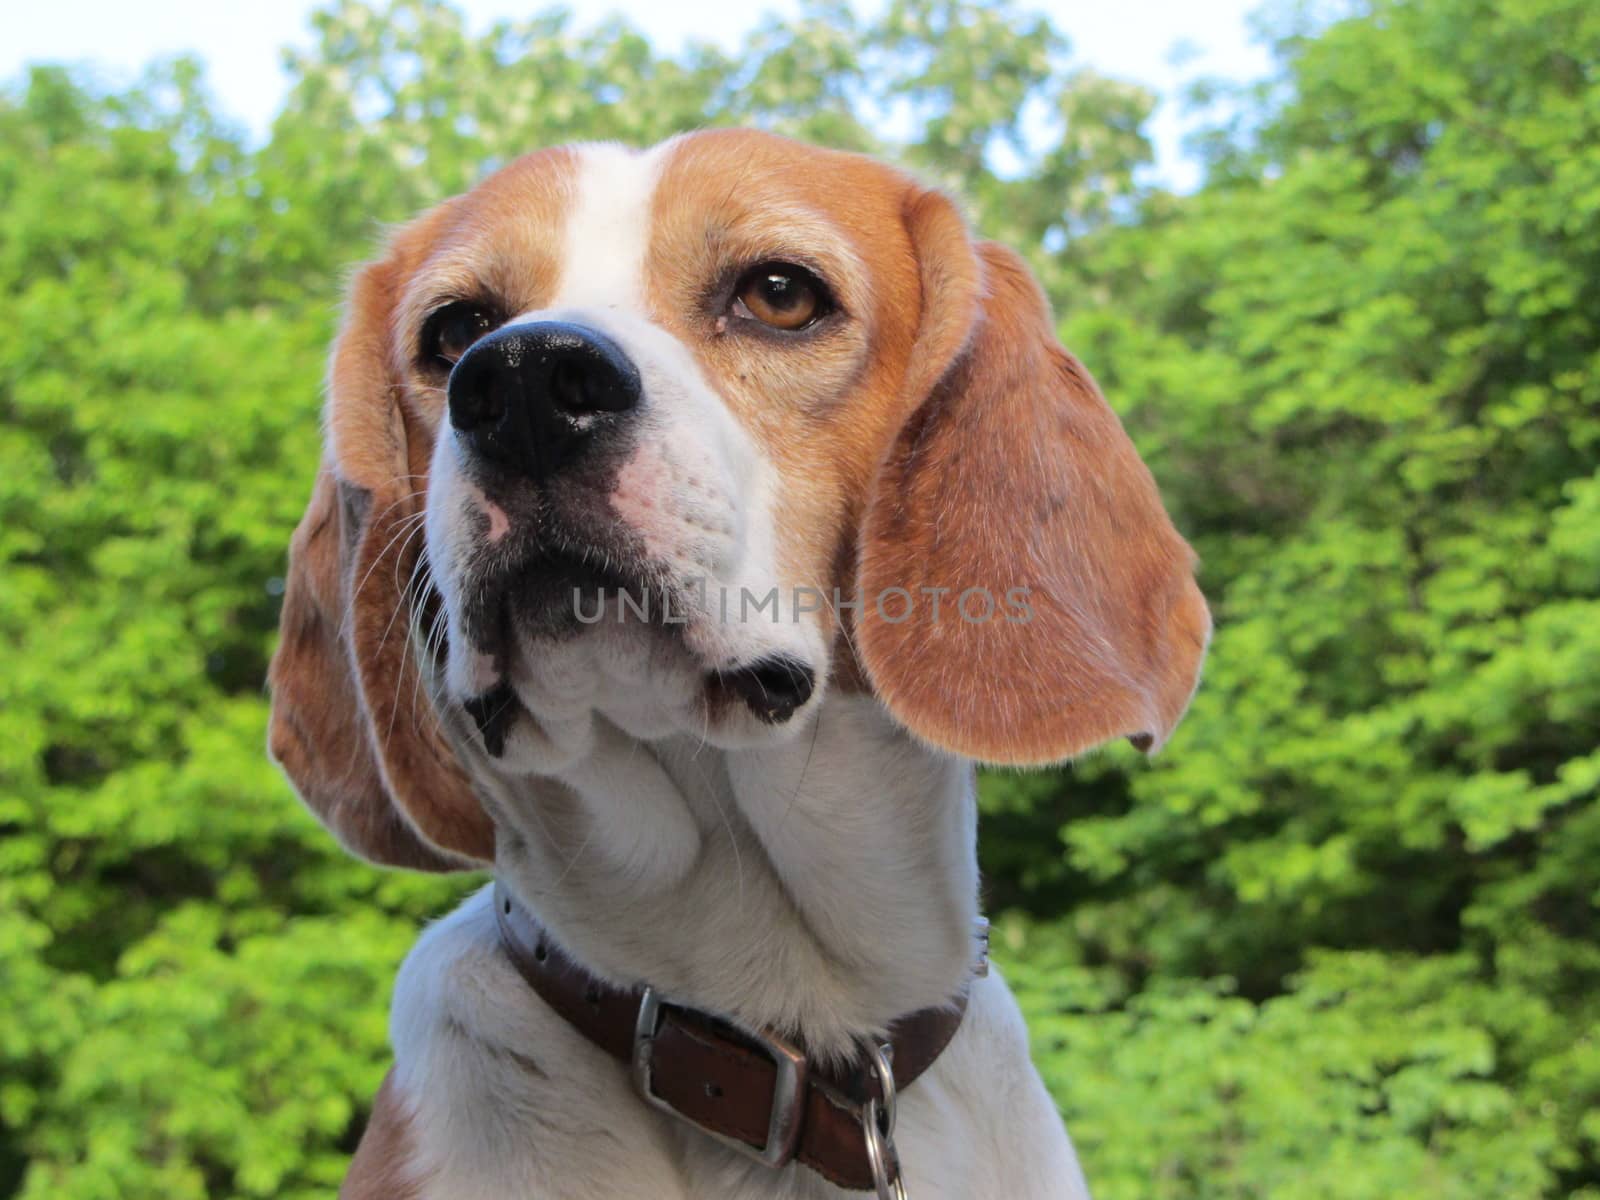 Photo representing an attentive beagle near a forest